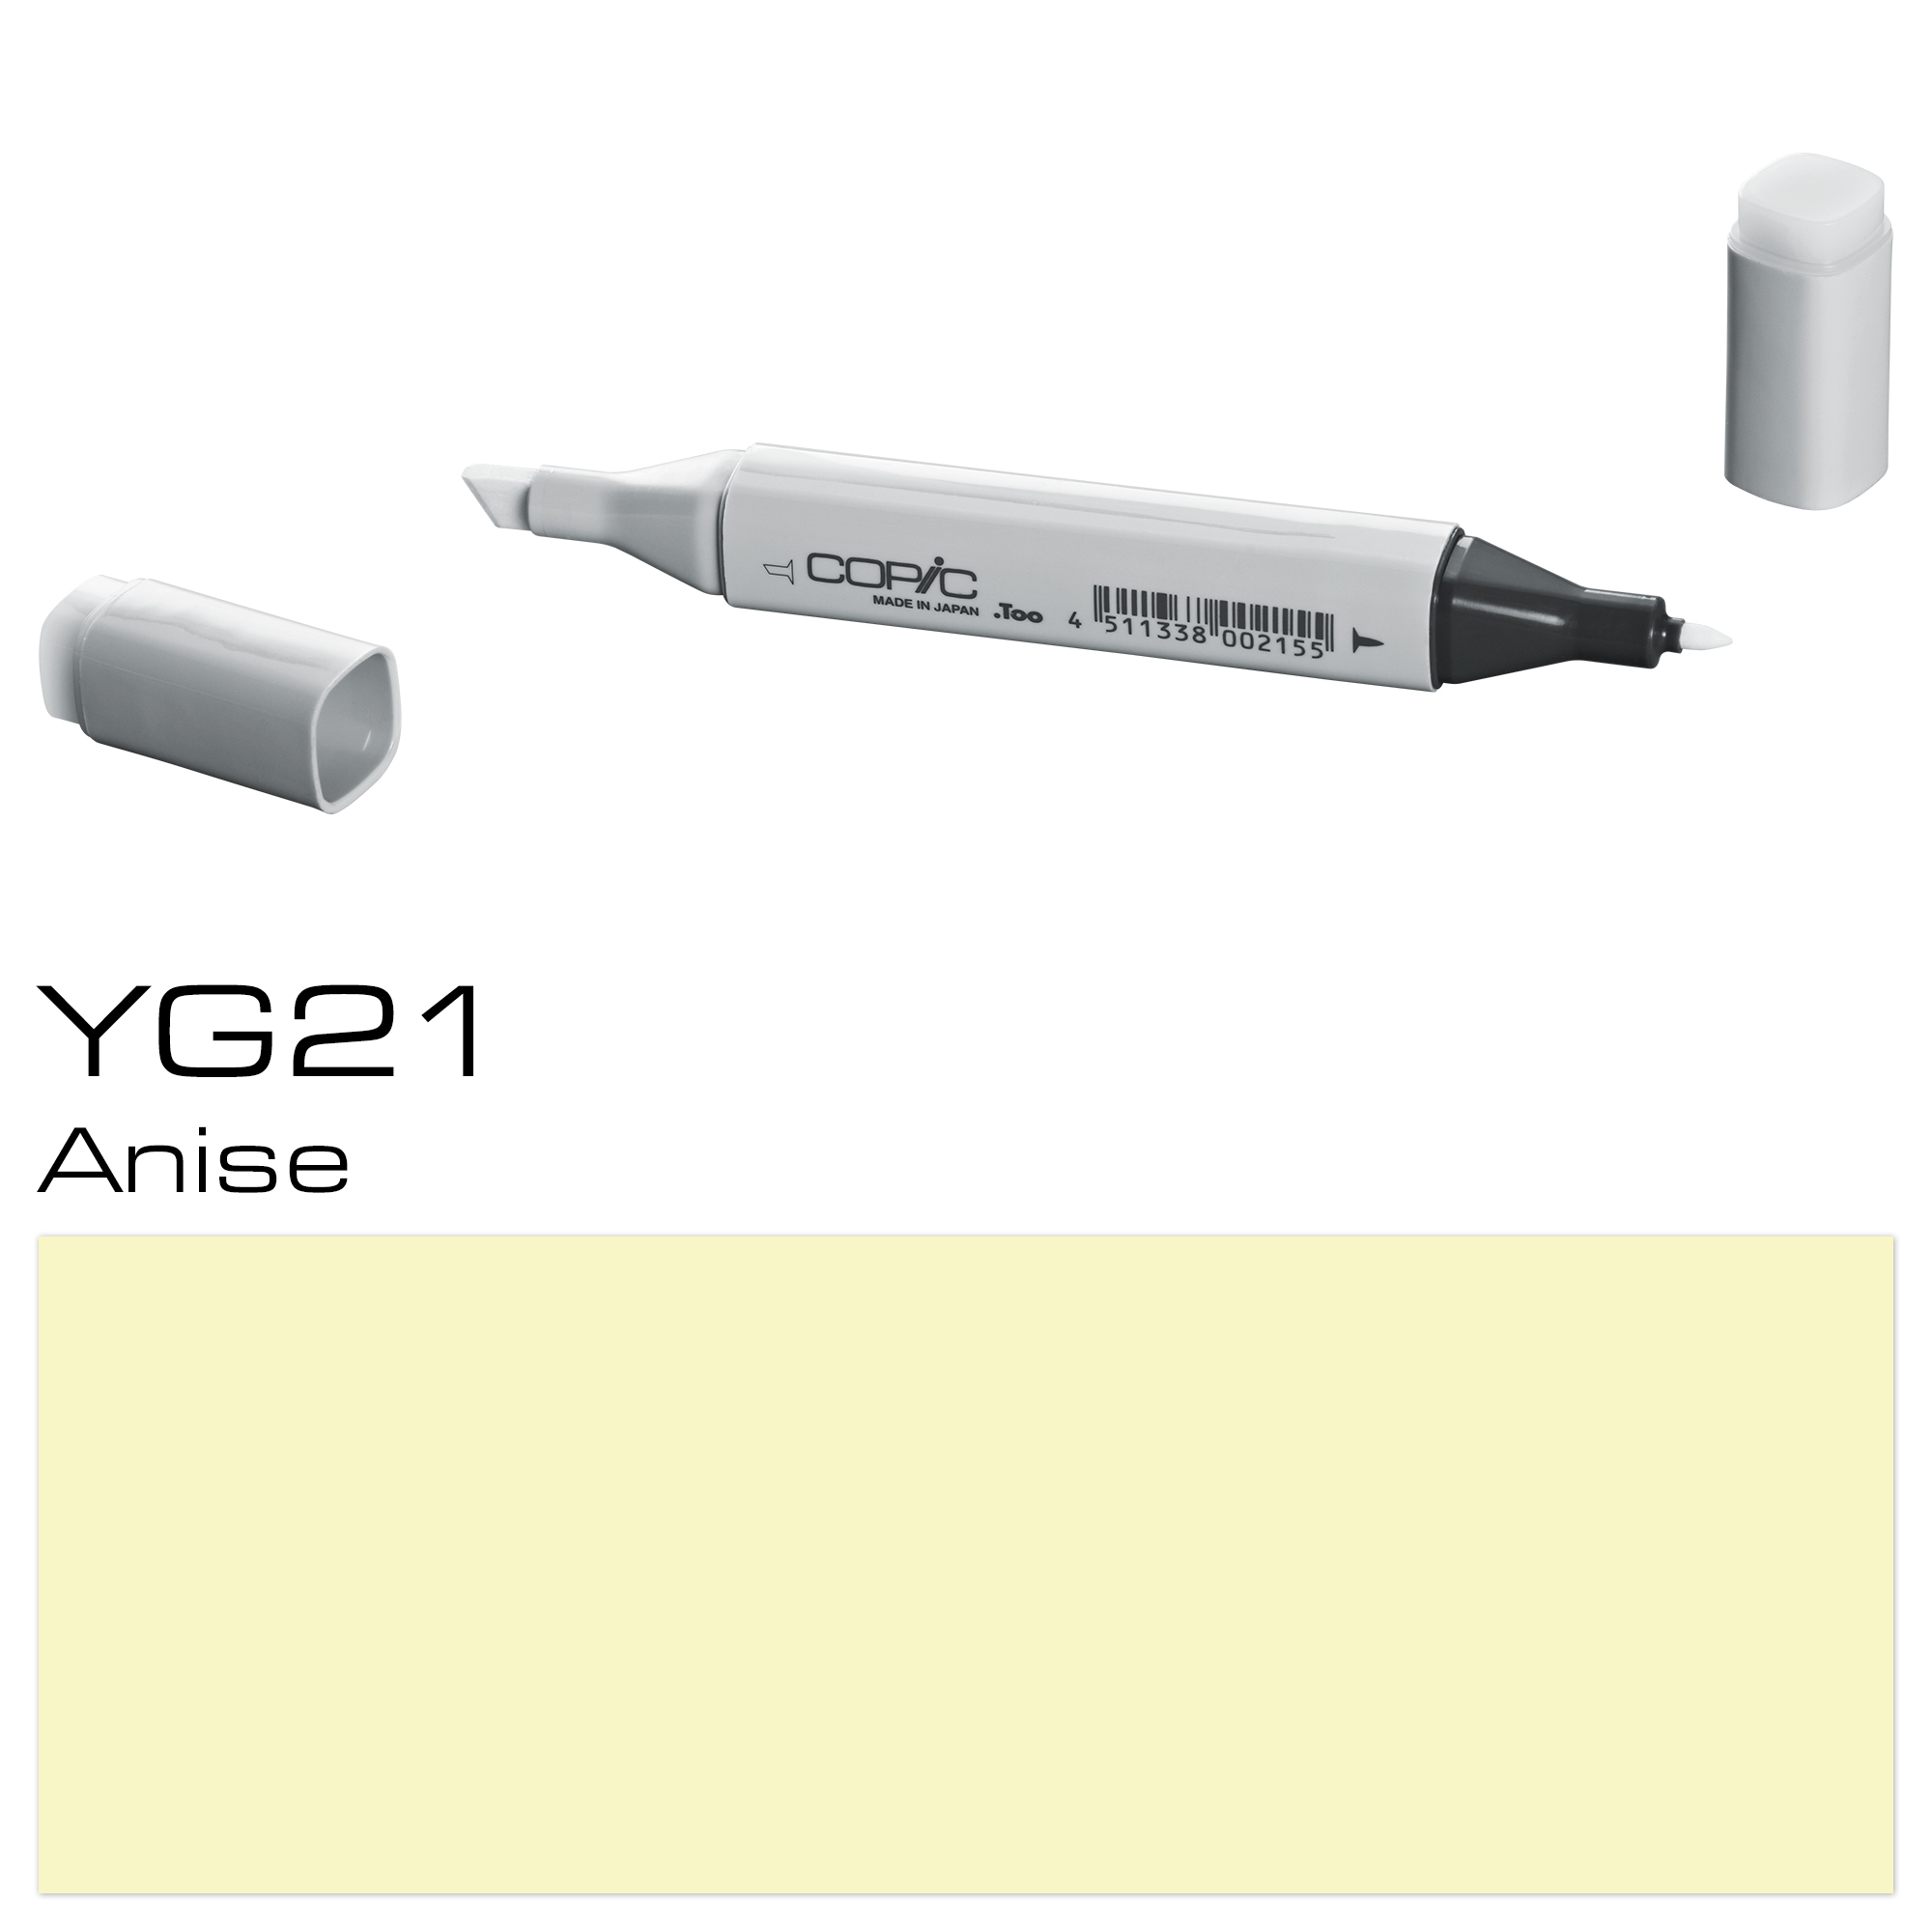 COPIC MARKER ANISE YG21